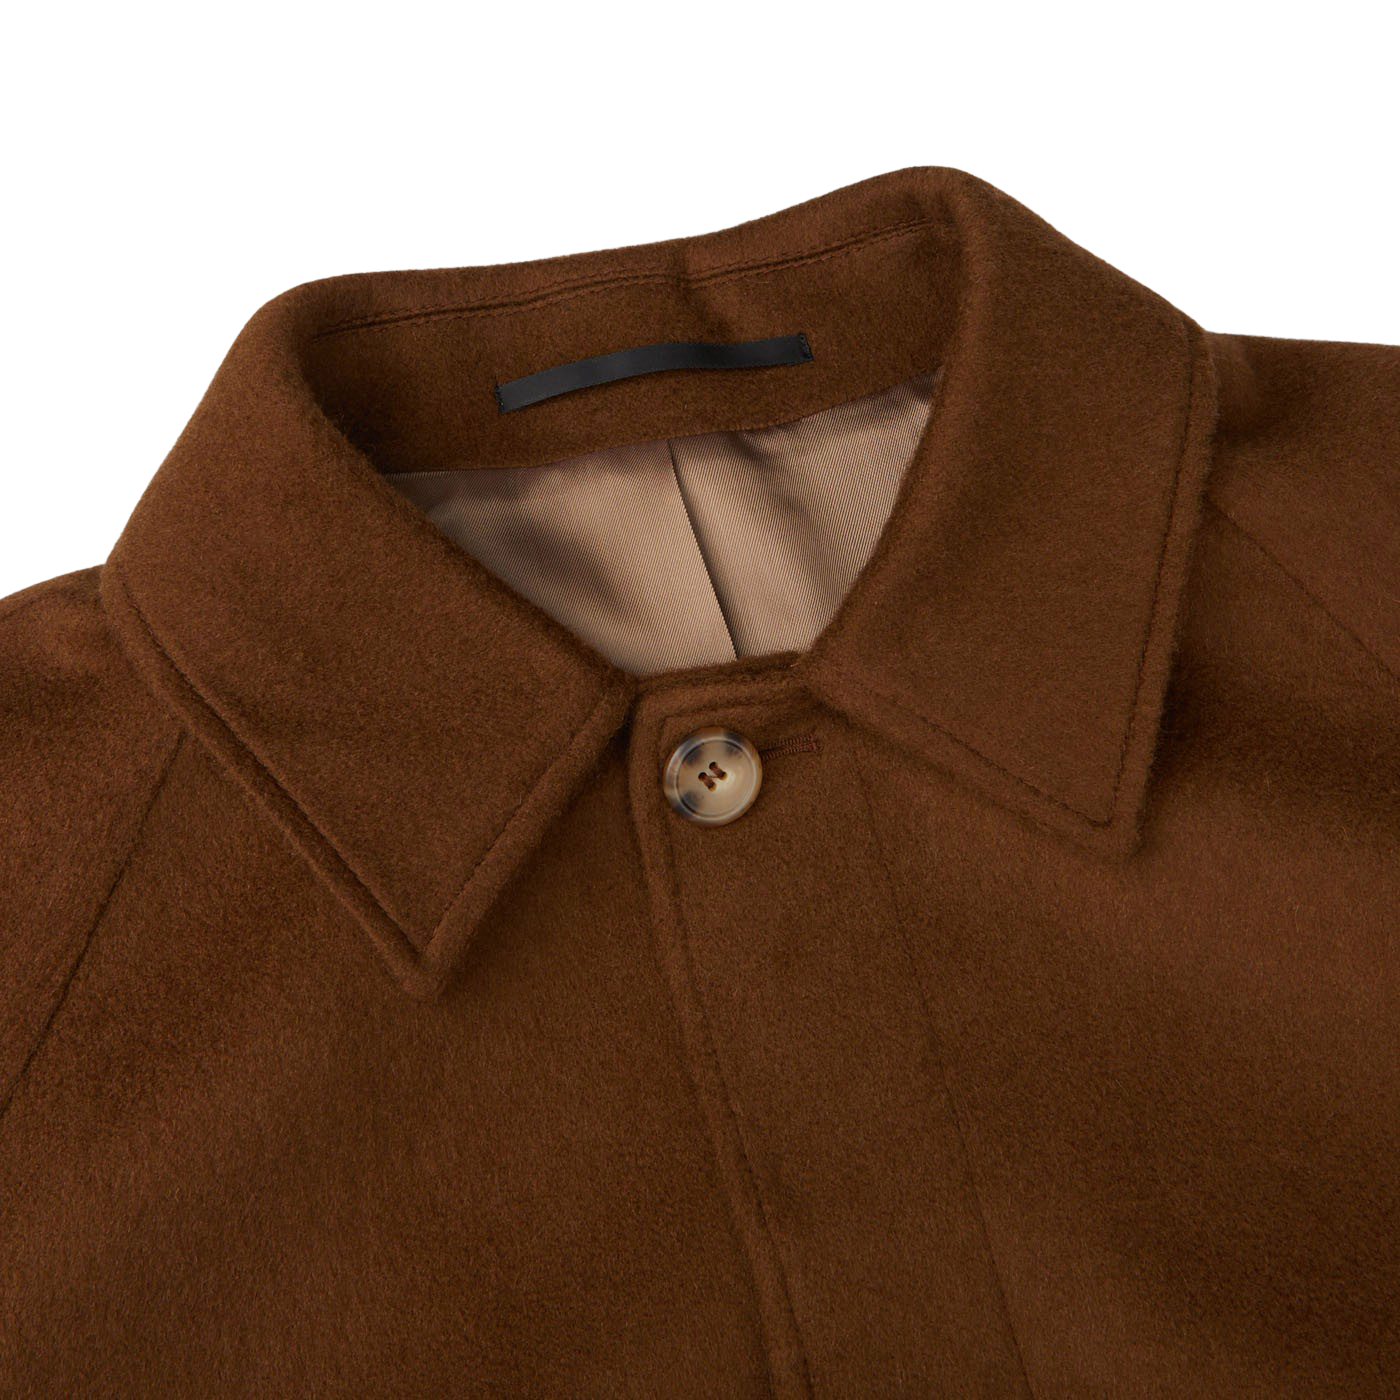 A close up of a Dark Brown Camel Wool Cashmere Raglan Coat from Studio 73.